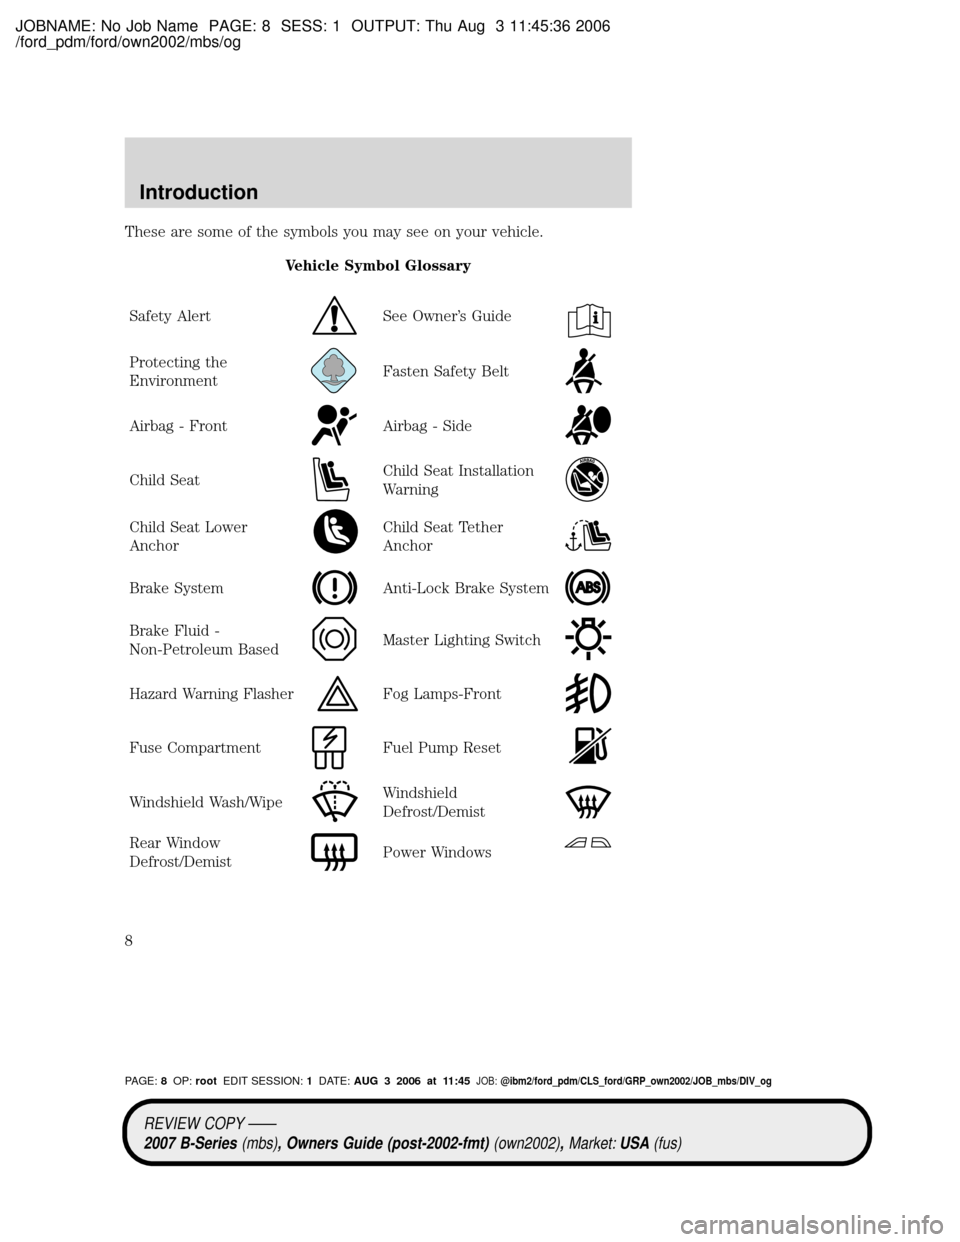 MAZDA MODEL B4000 TRUCK 2007  Owners Manual (in English) JOBNAME: No Job Name PAGE: 8 SESS: 1 OUTPUT: Thu Aug 3 11:45:36 2006
/ford_pdm/ford/own2002/mbs/og
These are some of the symbols you may see on your vehicle.
Vehicle Symbol Glossary
Safety Alert
See O